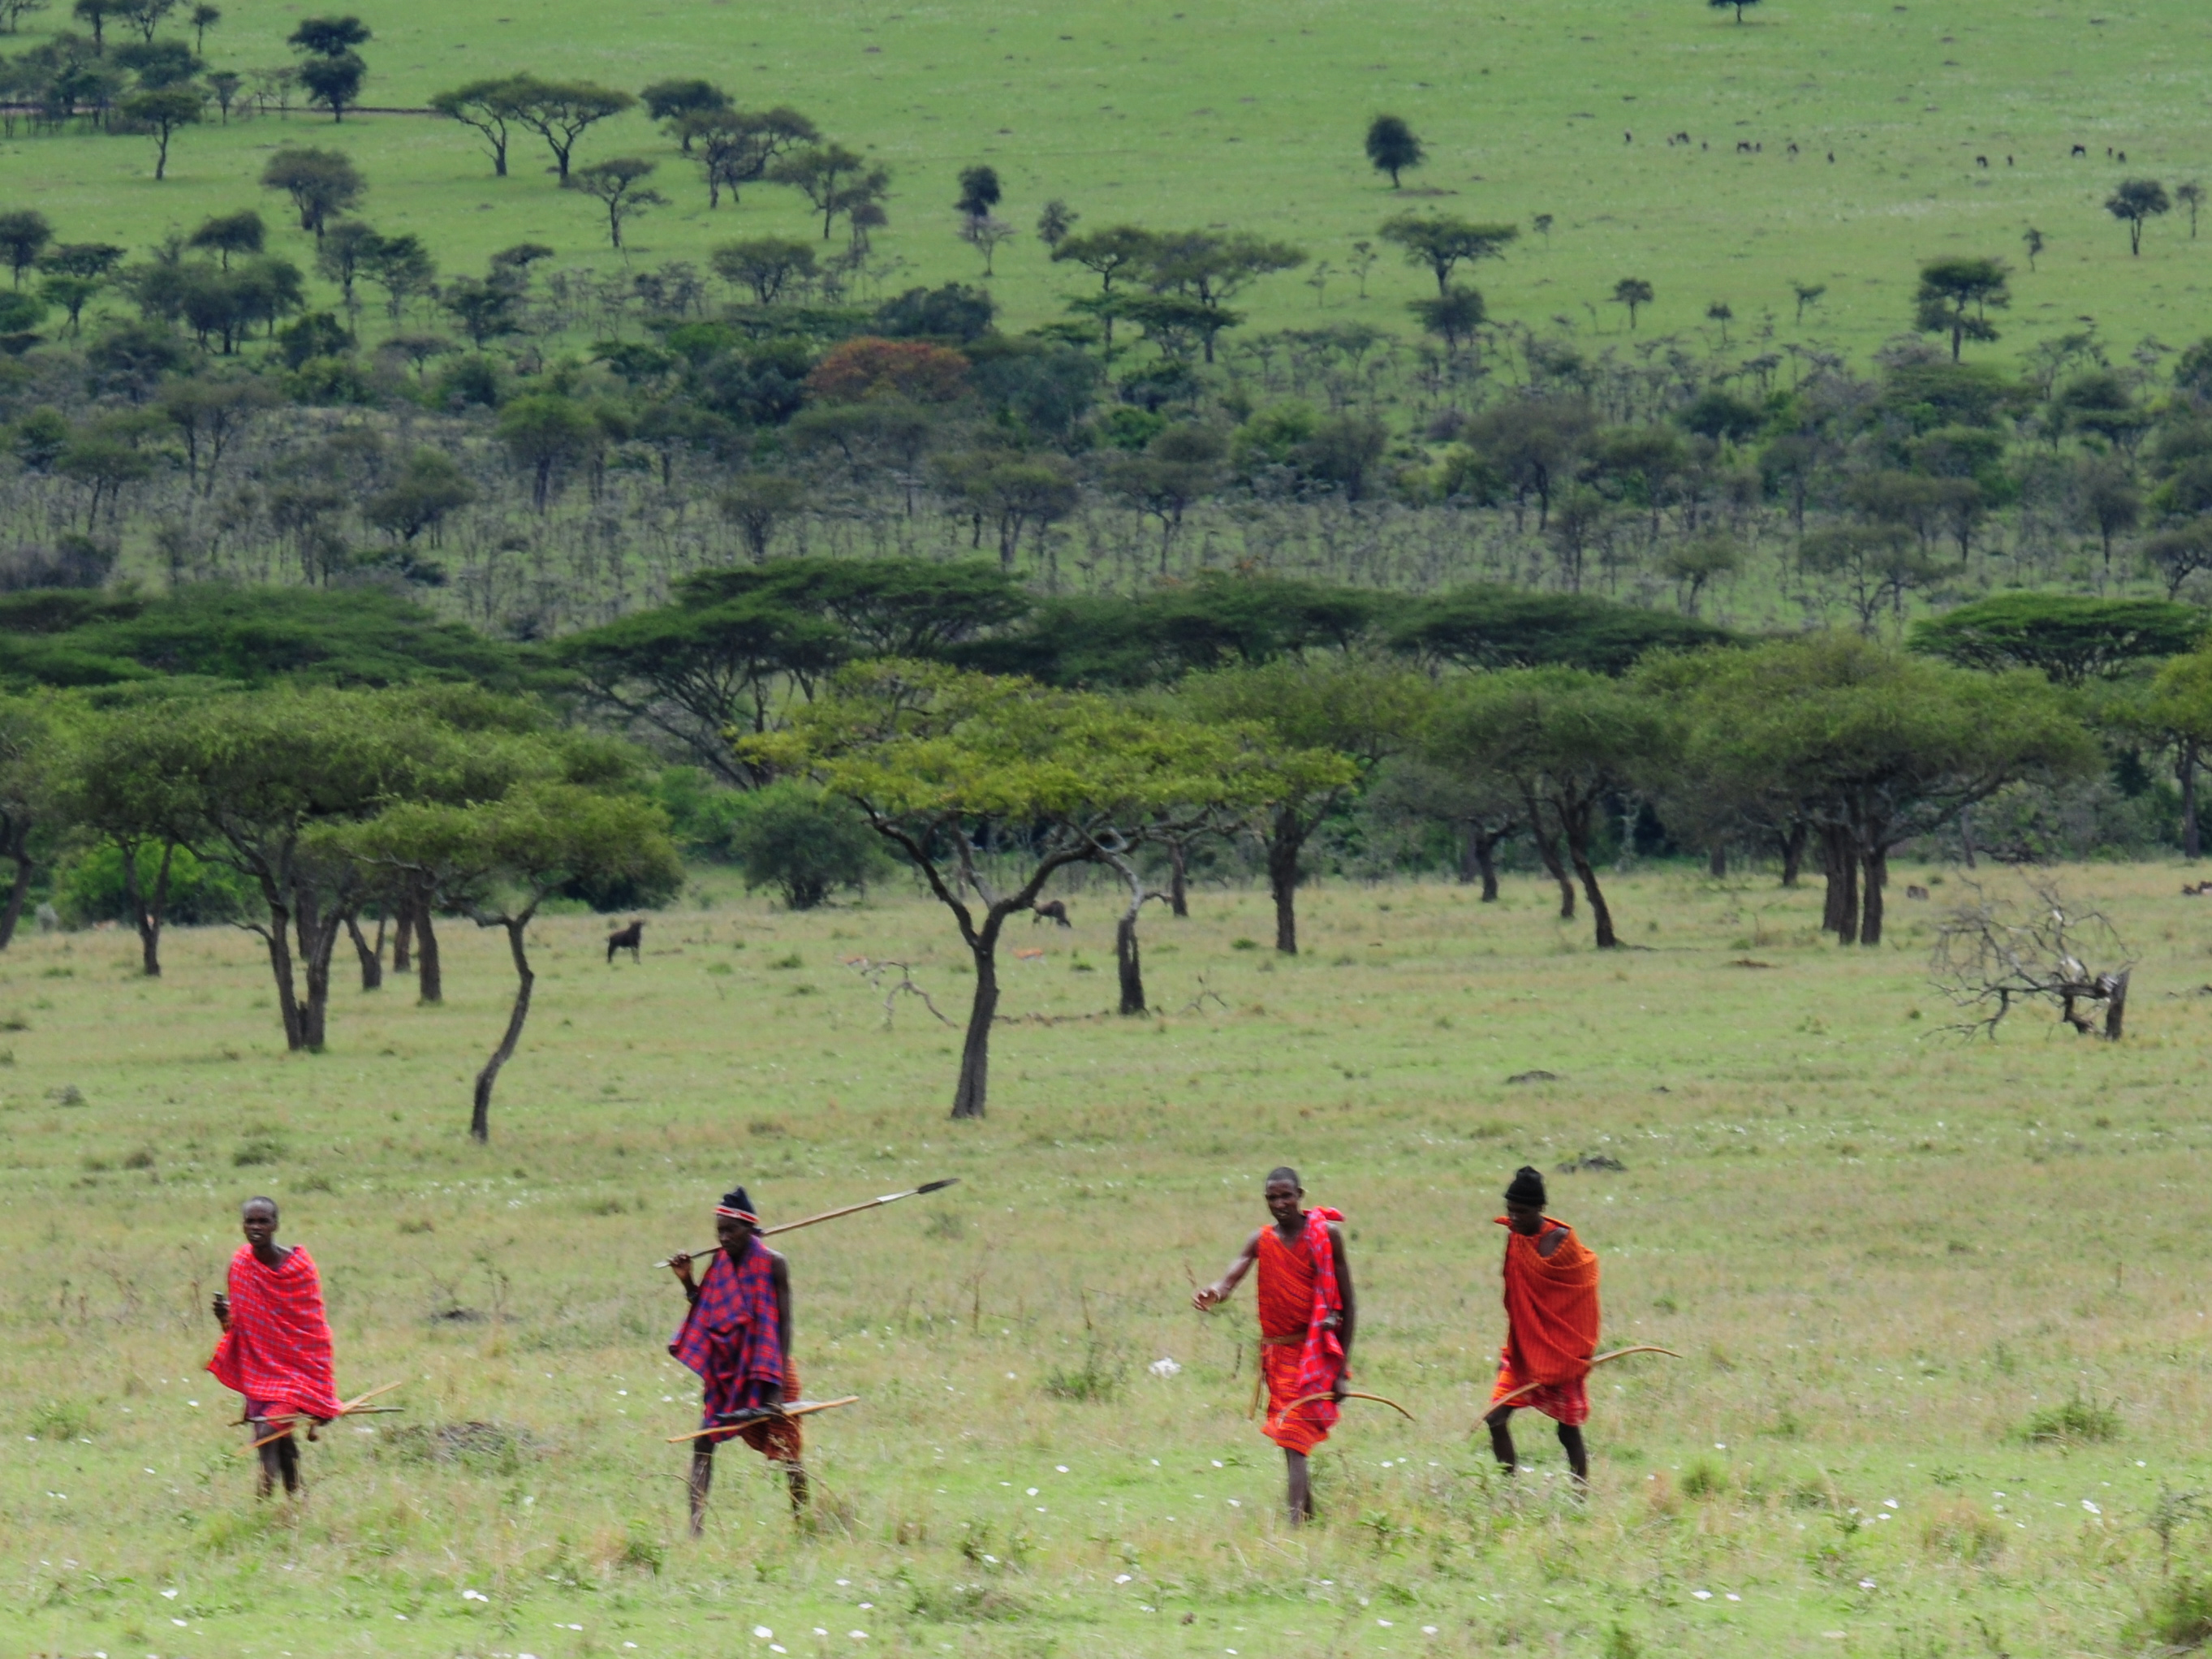 Maasai in Loliondo, 2008,Vince Smith Attribution 2.0 Generic (CC BY 2.0) https://www.flickr.com/photos/vsmithuk/3067040426/ 